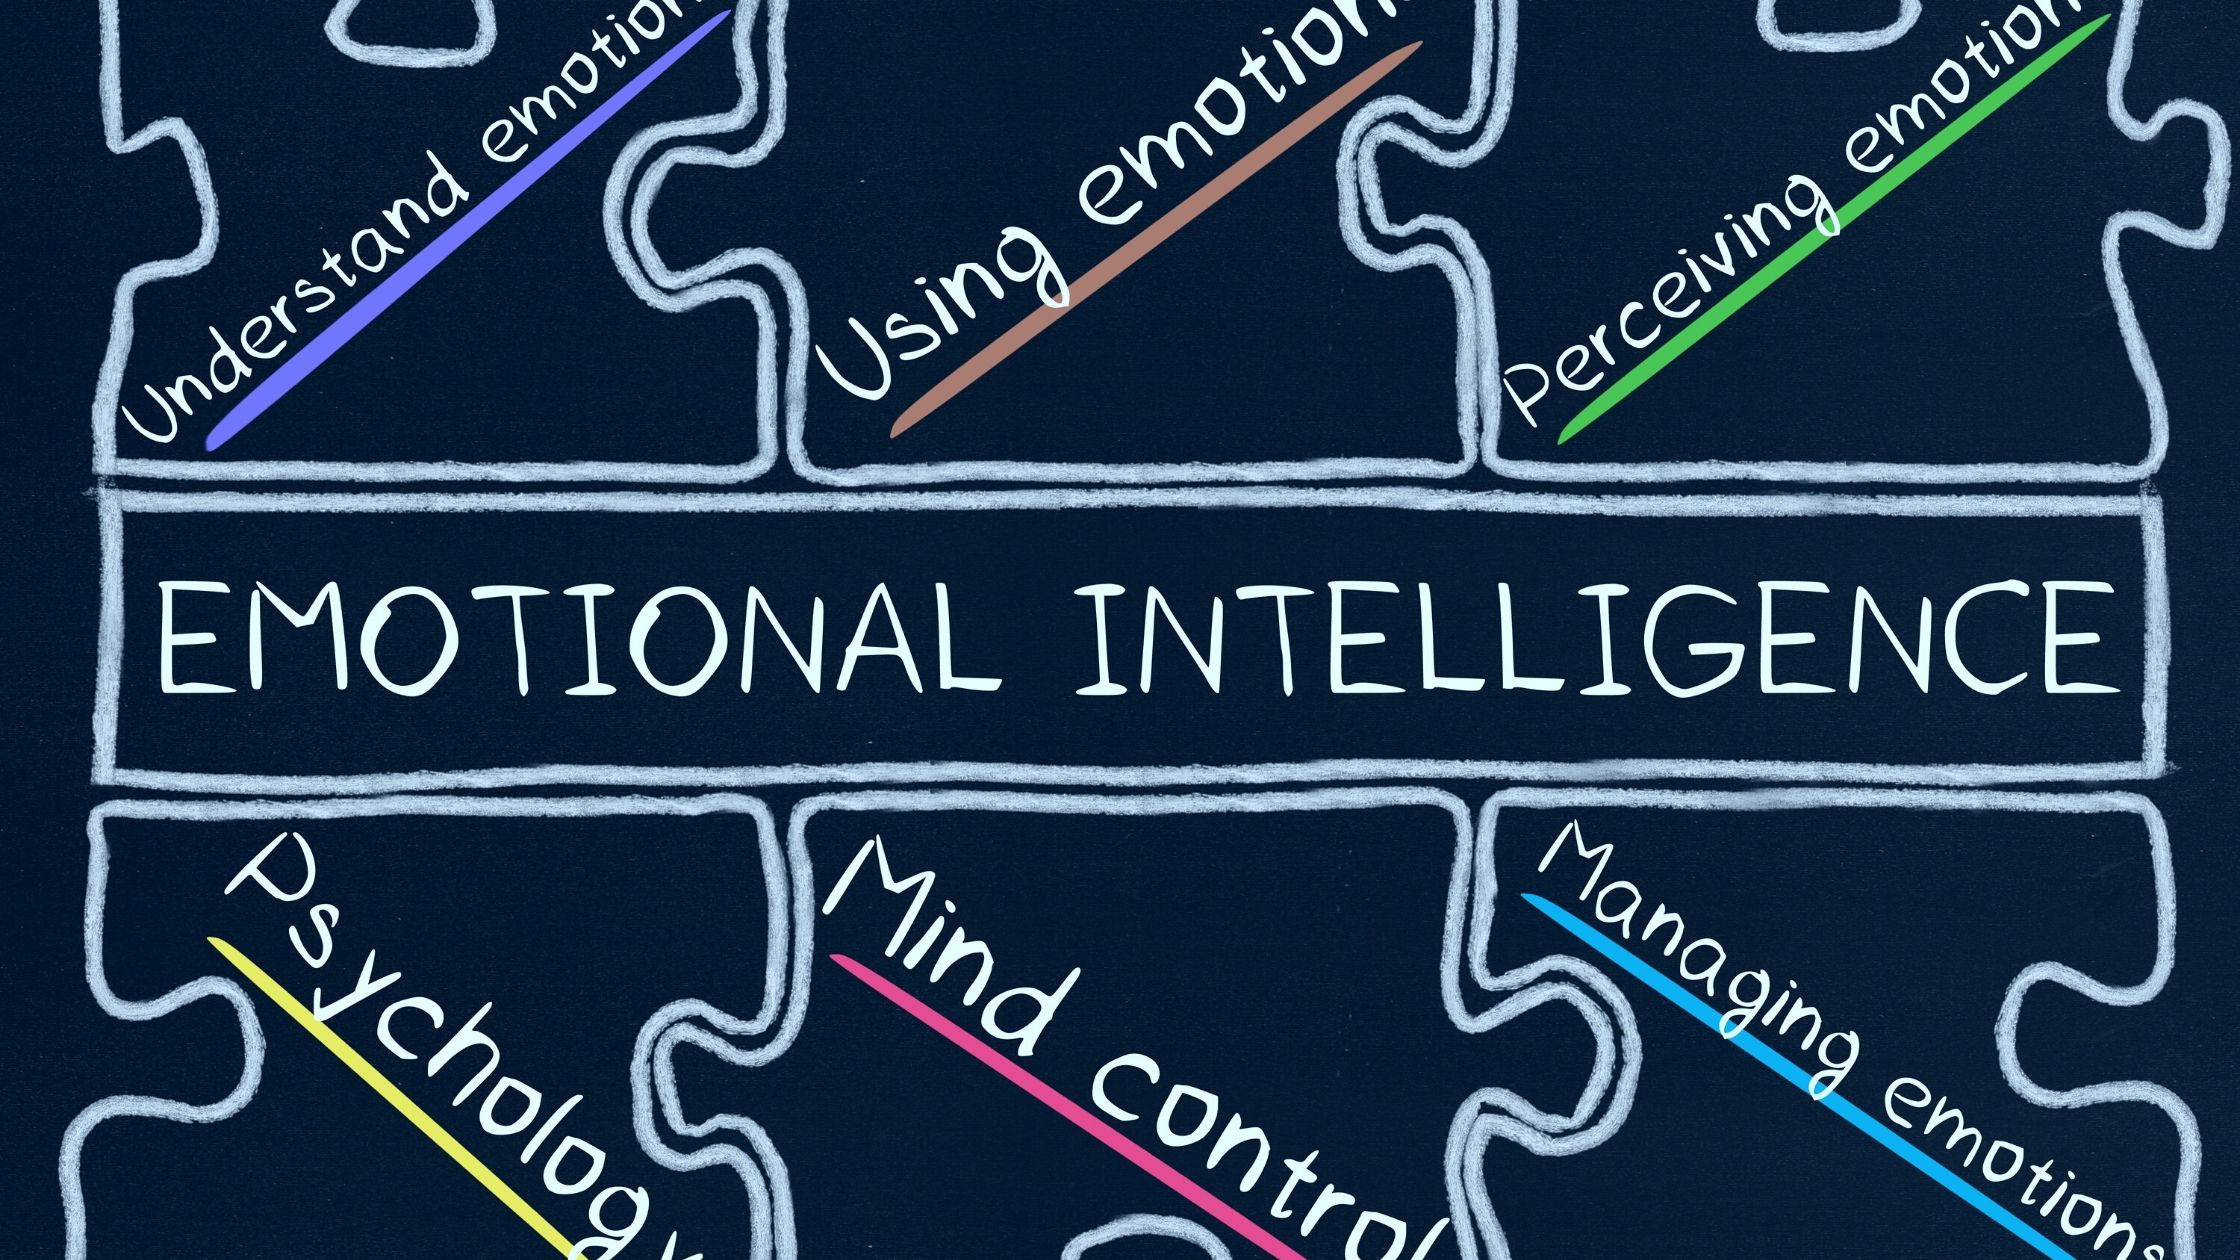 What is emotional intelligence